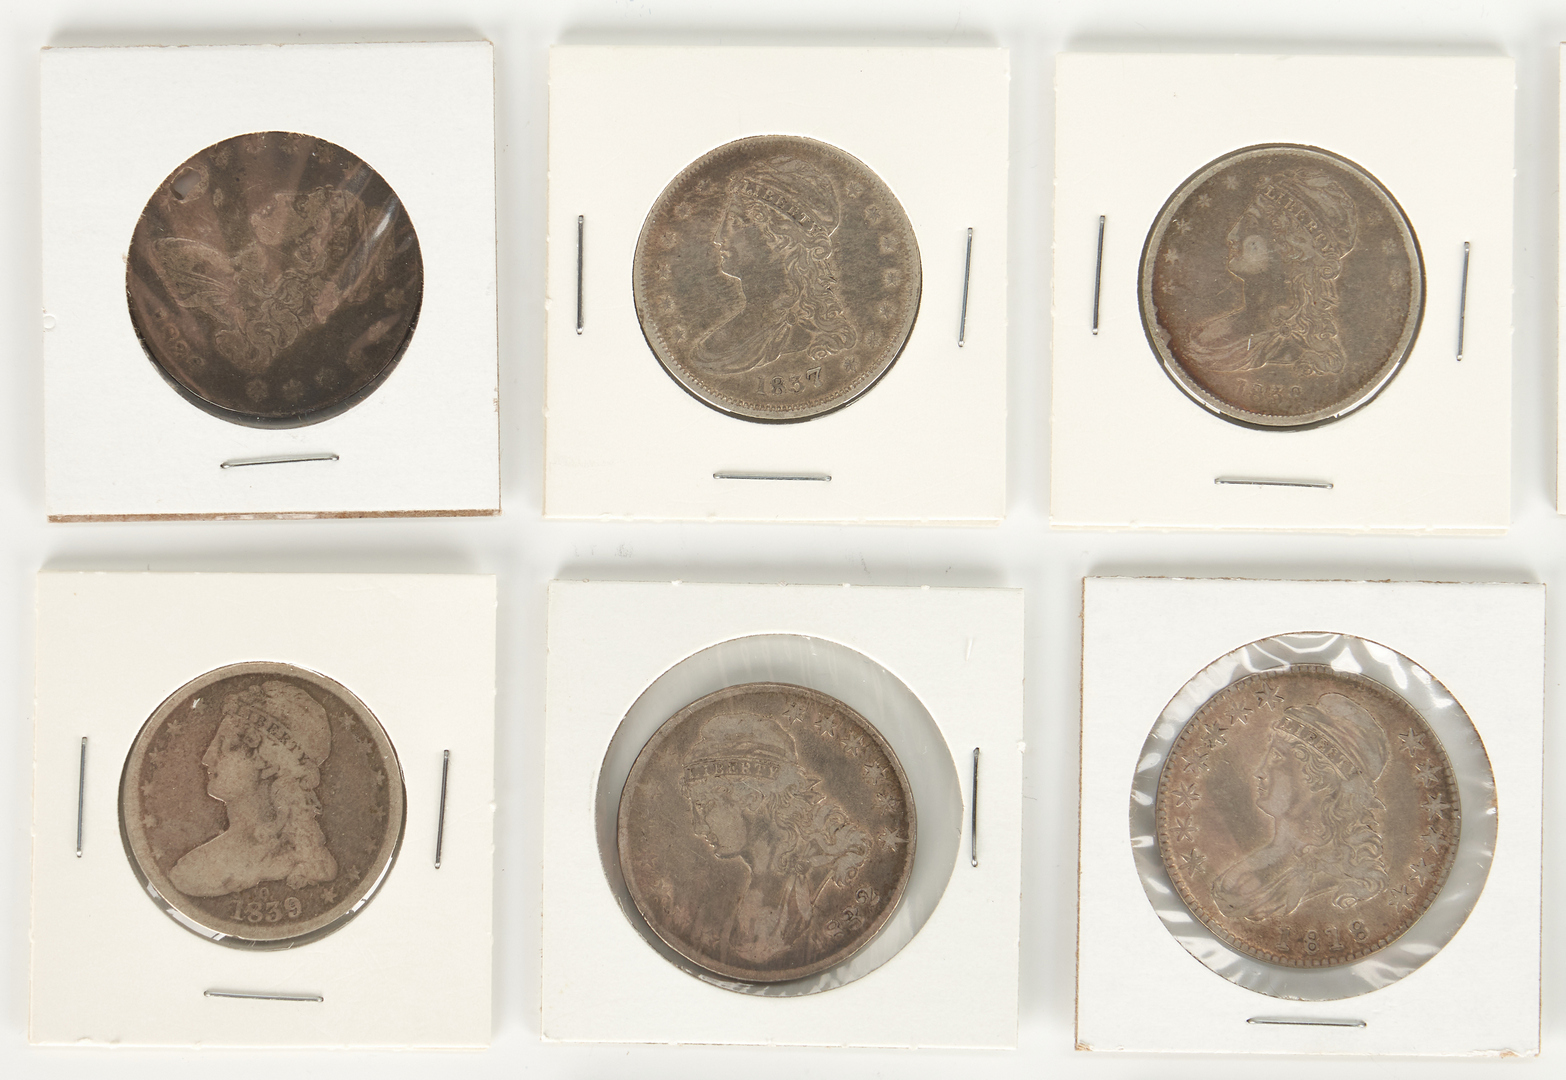 Lot 759: 16 US Capped Bust Silver Half Dollars, 1808-1839